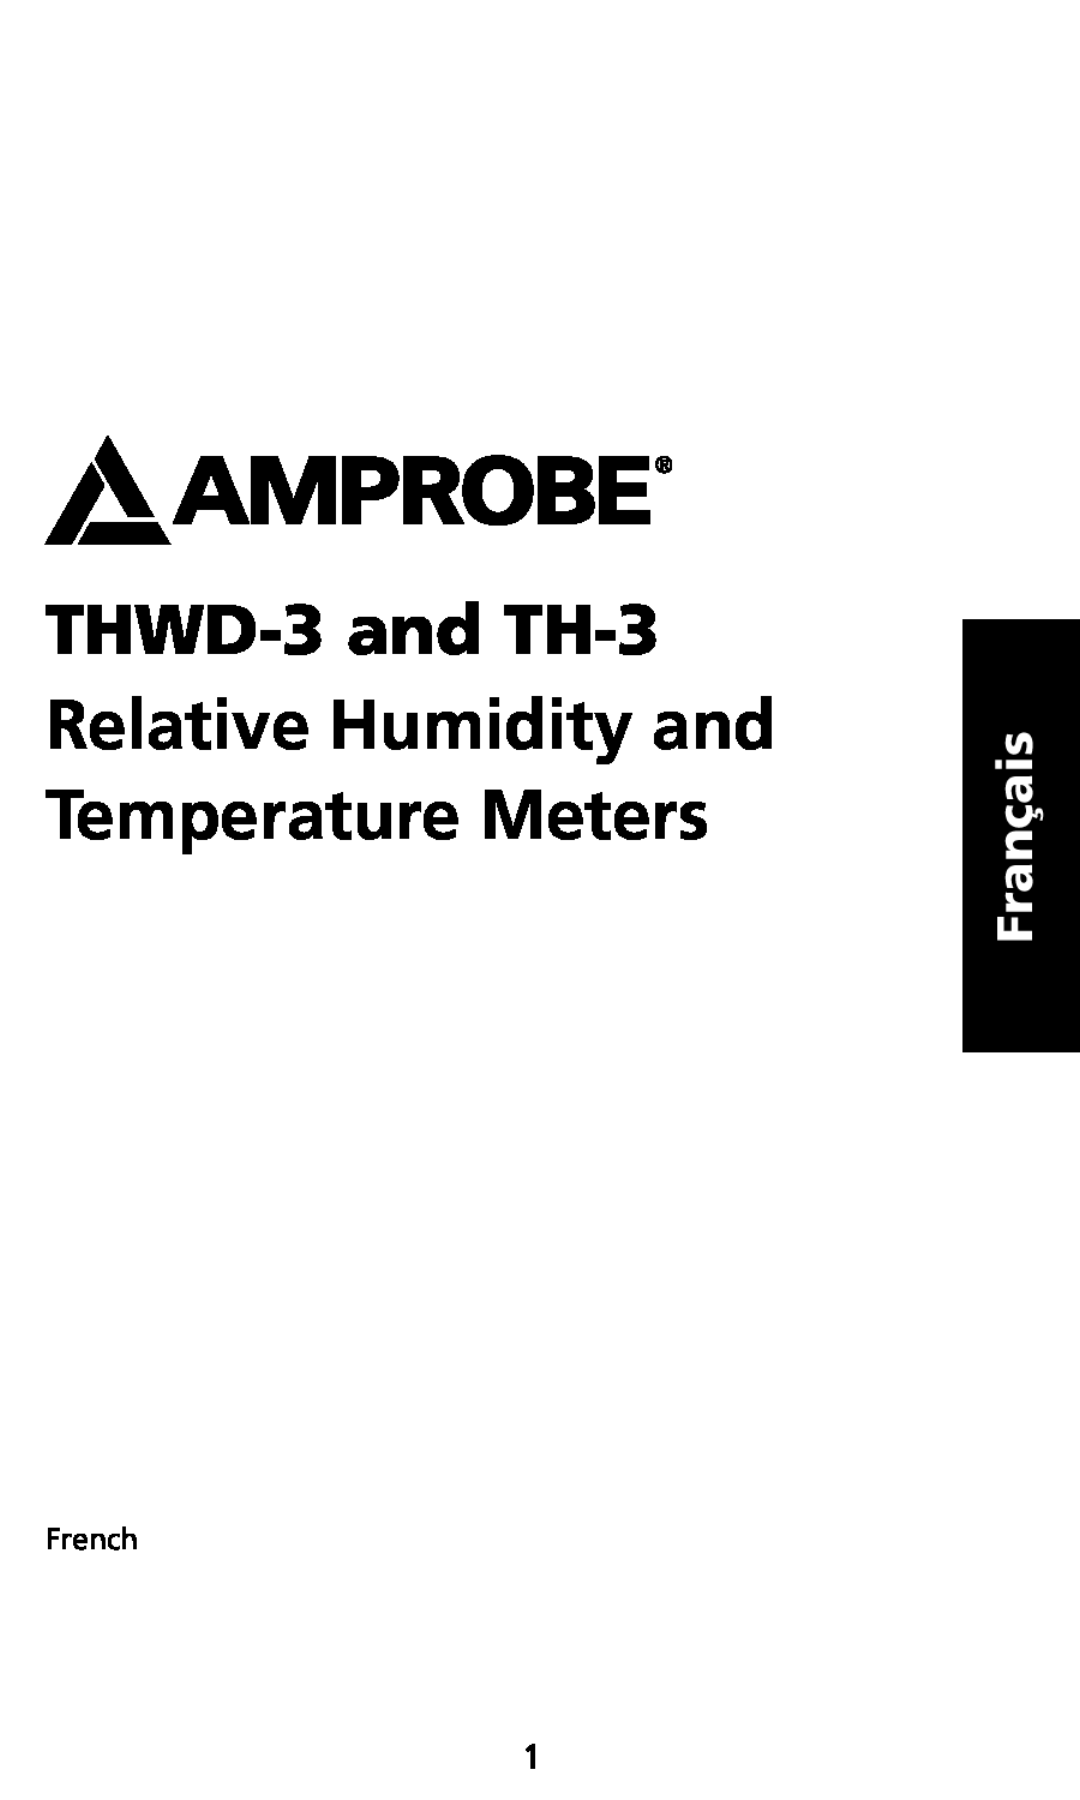 Ampro Corporation user manual Français, THWD-3 and TH-3 Relative Humidity and Temperature Meters, French 